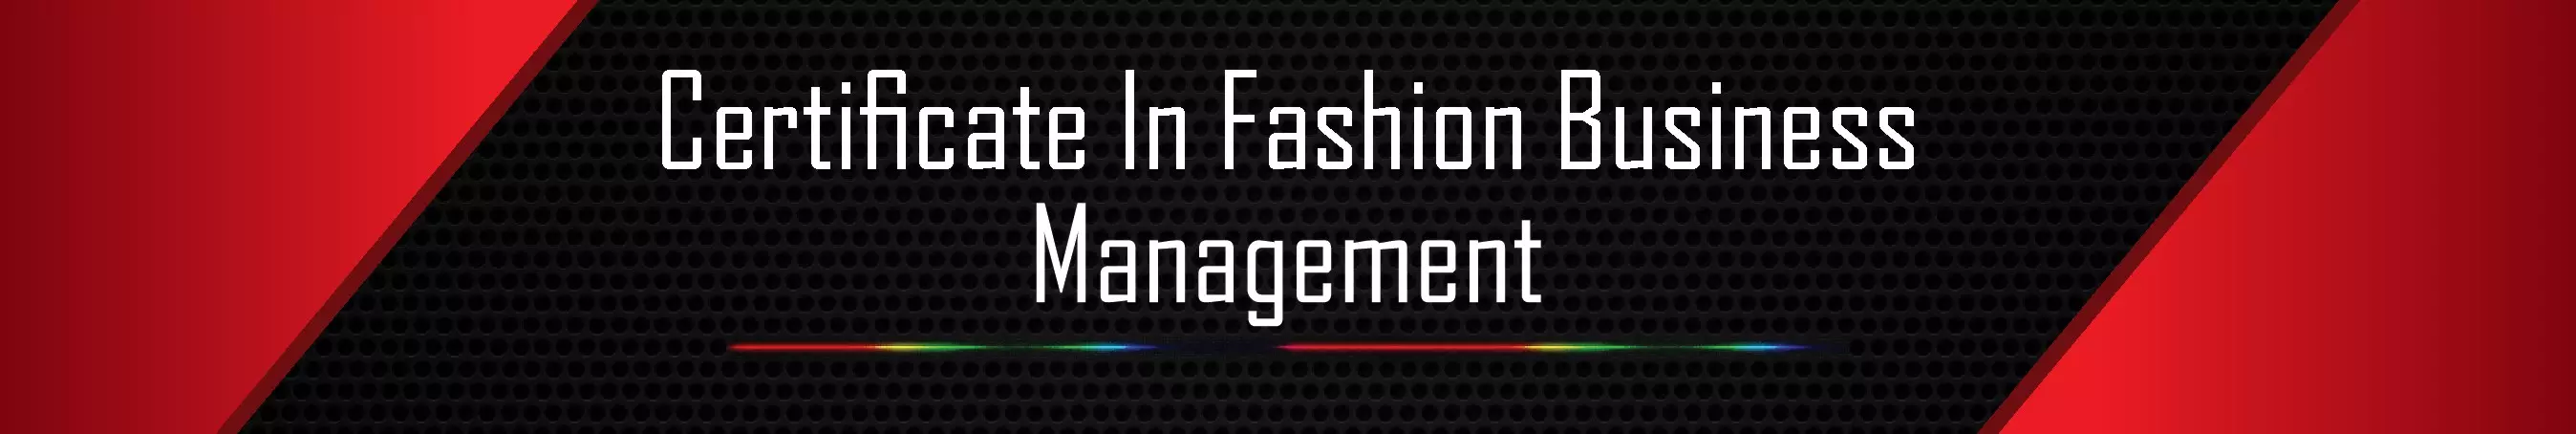 Certificate in fashion business management